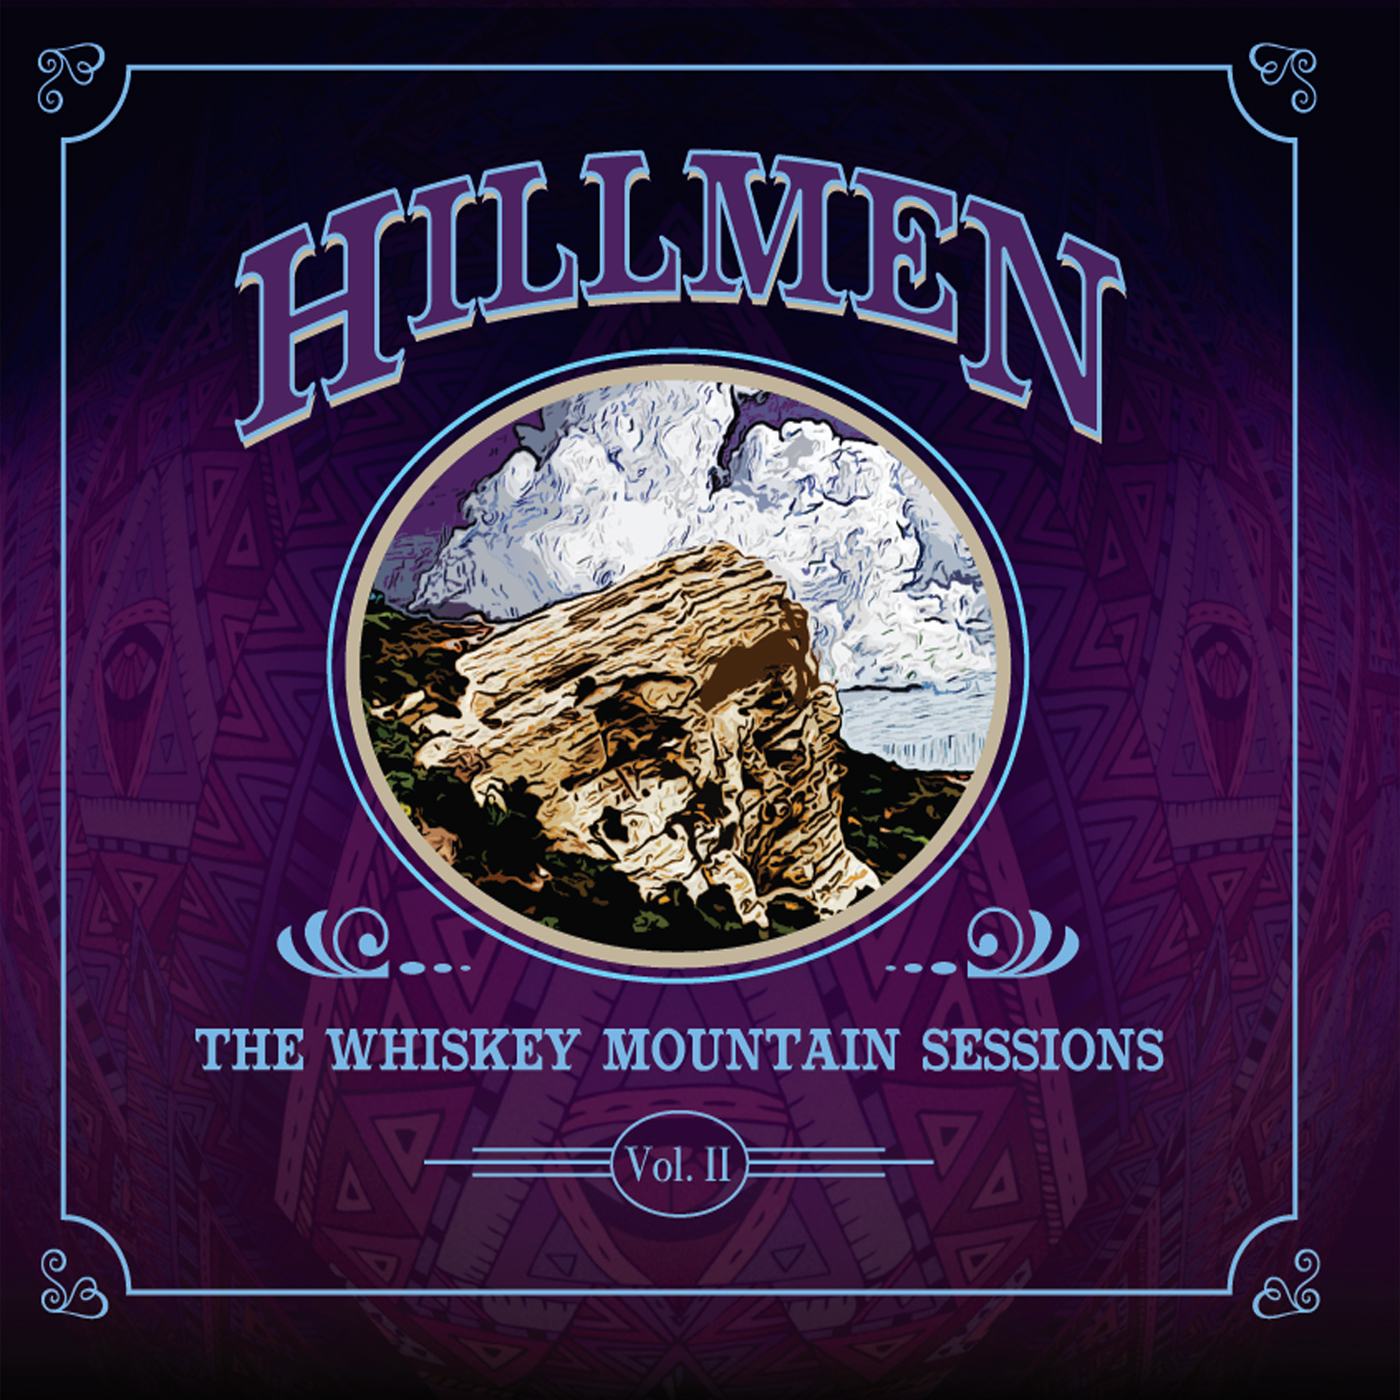 Hillmen: The Whiskey Mountain Sessions Vol. II (2018)